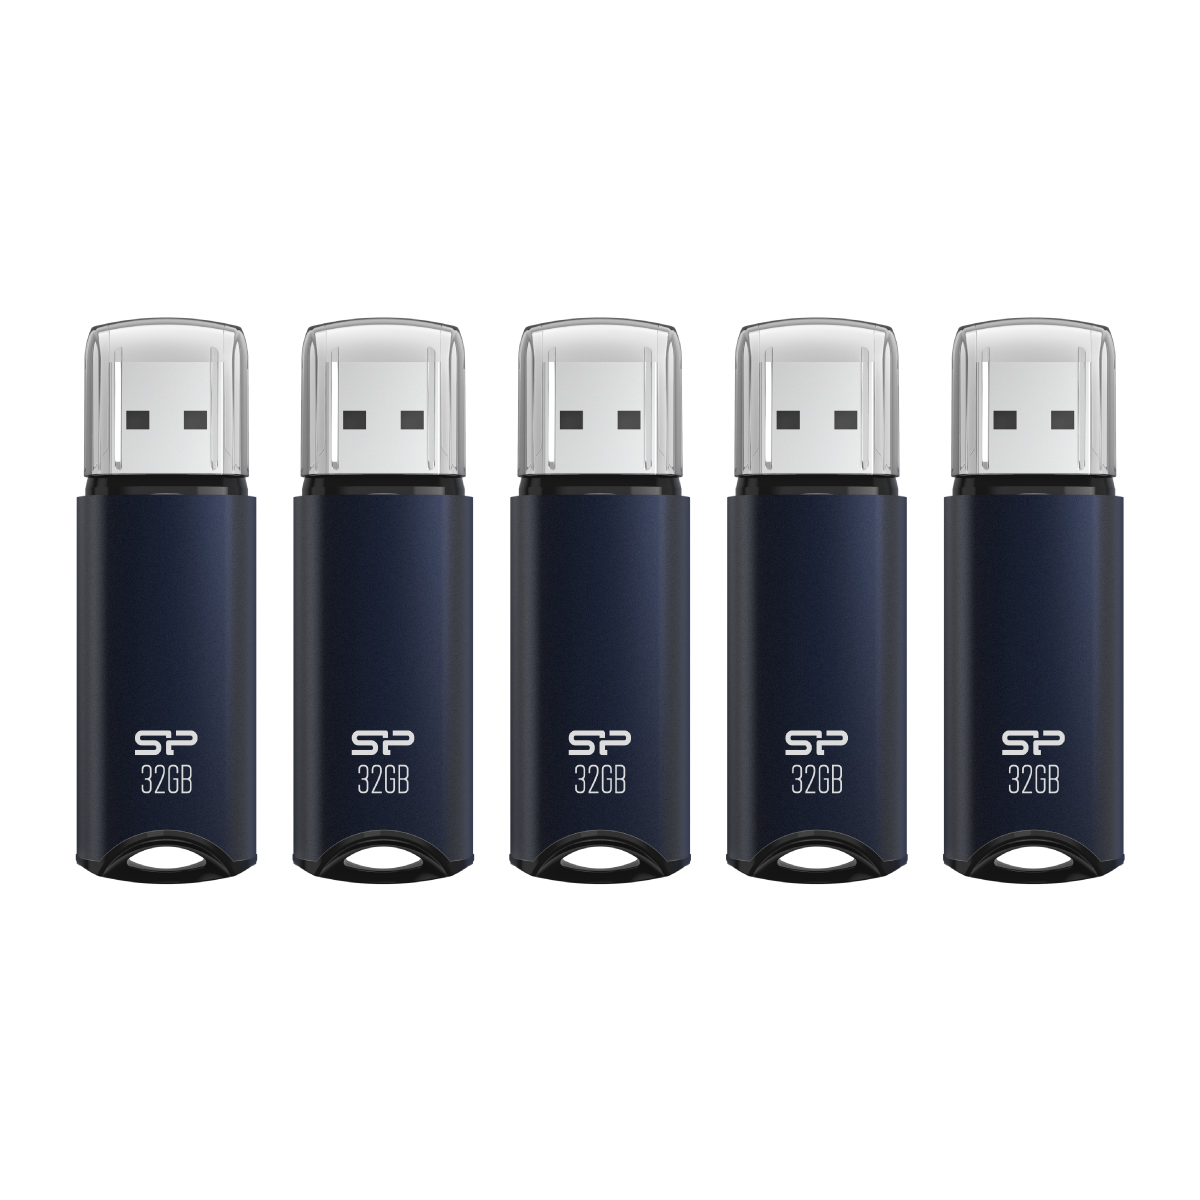 Silicon Power 32GB Marvel M02 USB 3.0 Flash Drive - Navy Blue (5-Pack)